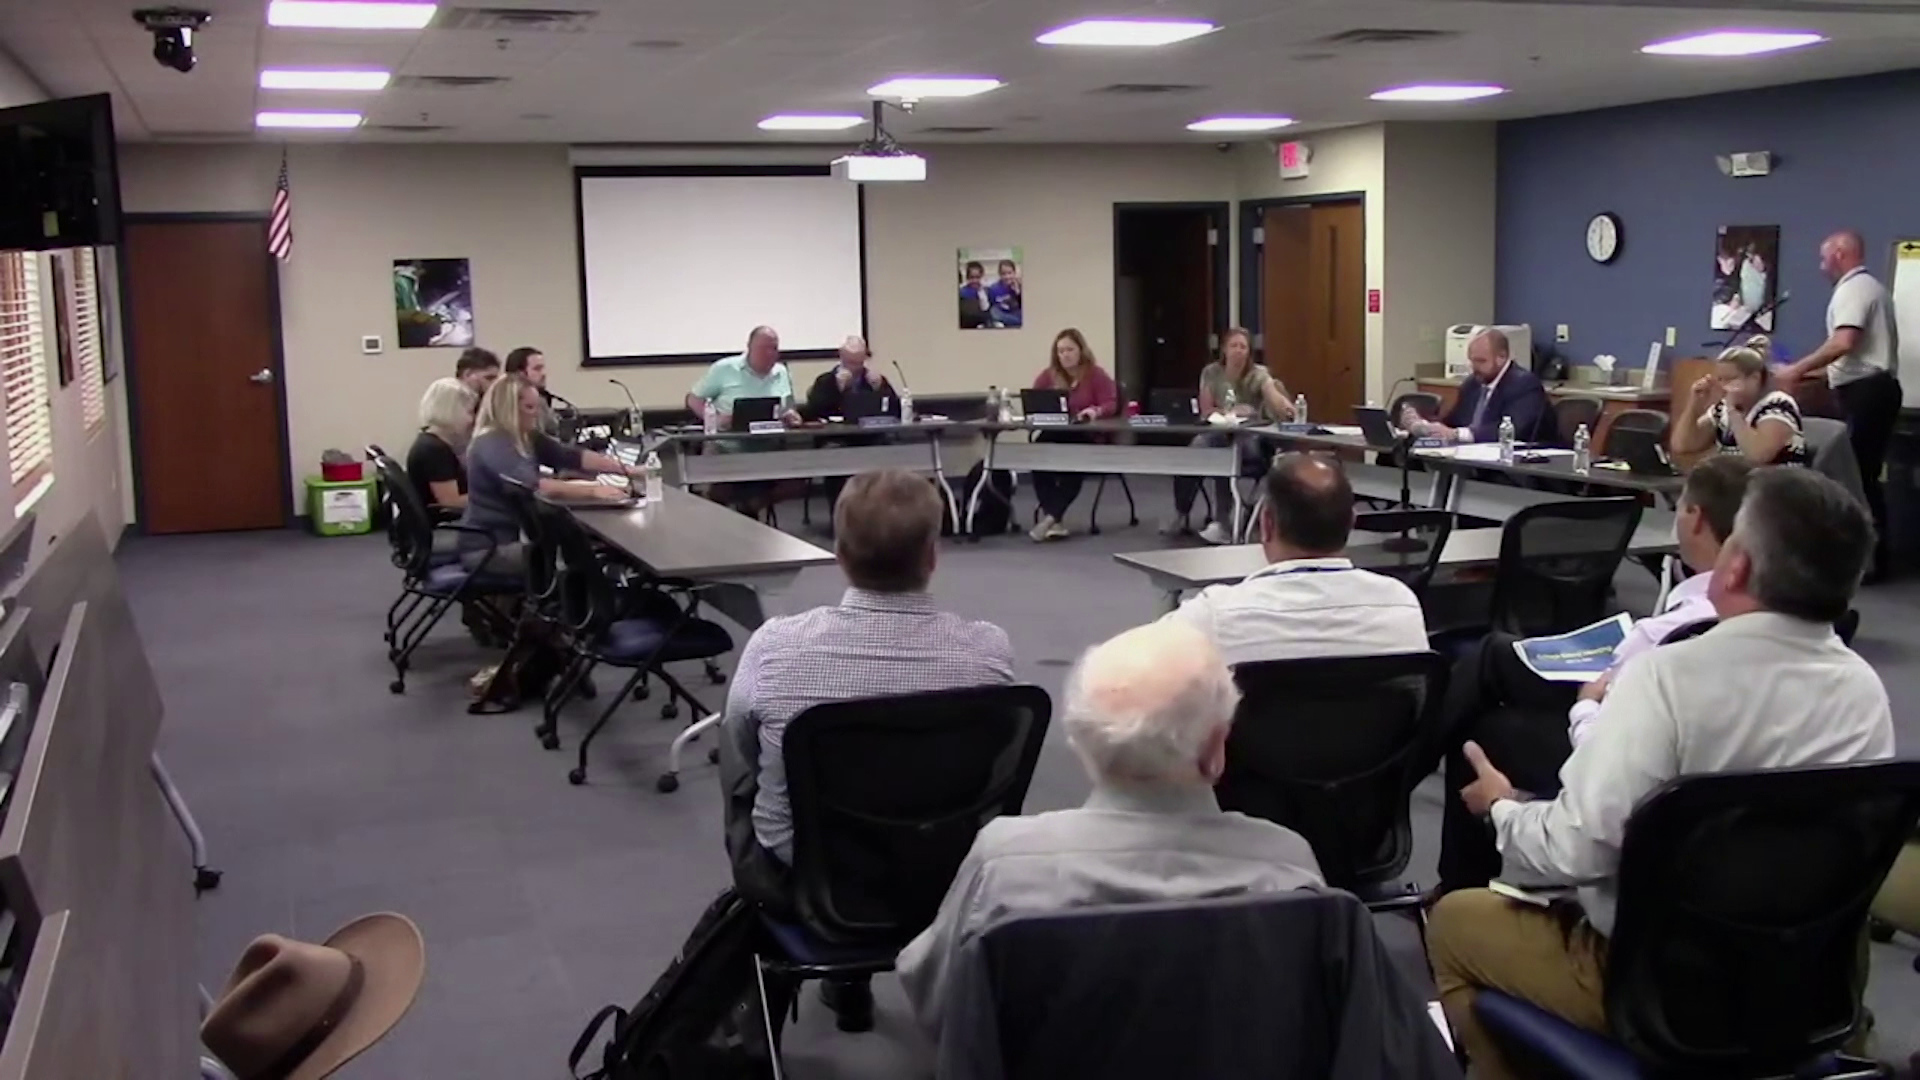 Members of the Mukwonago school board sit in rolling chairs around multiple folding tables arranged in a horseshoe position, with other people sitting and facing the meeting, in a room with a projector screen, exit sign and fluorescent lights.